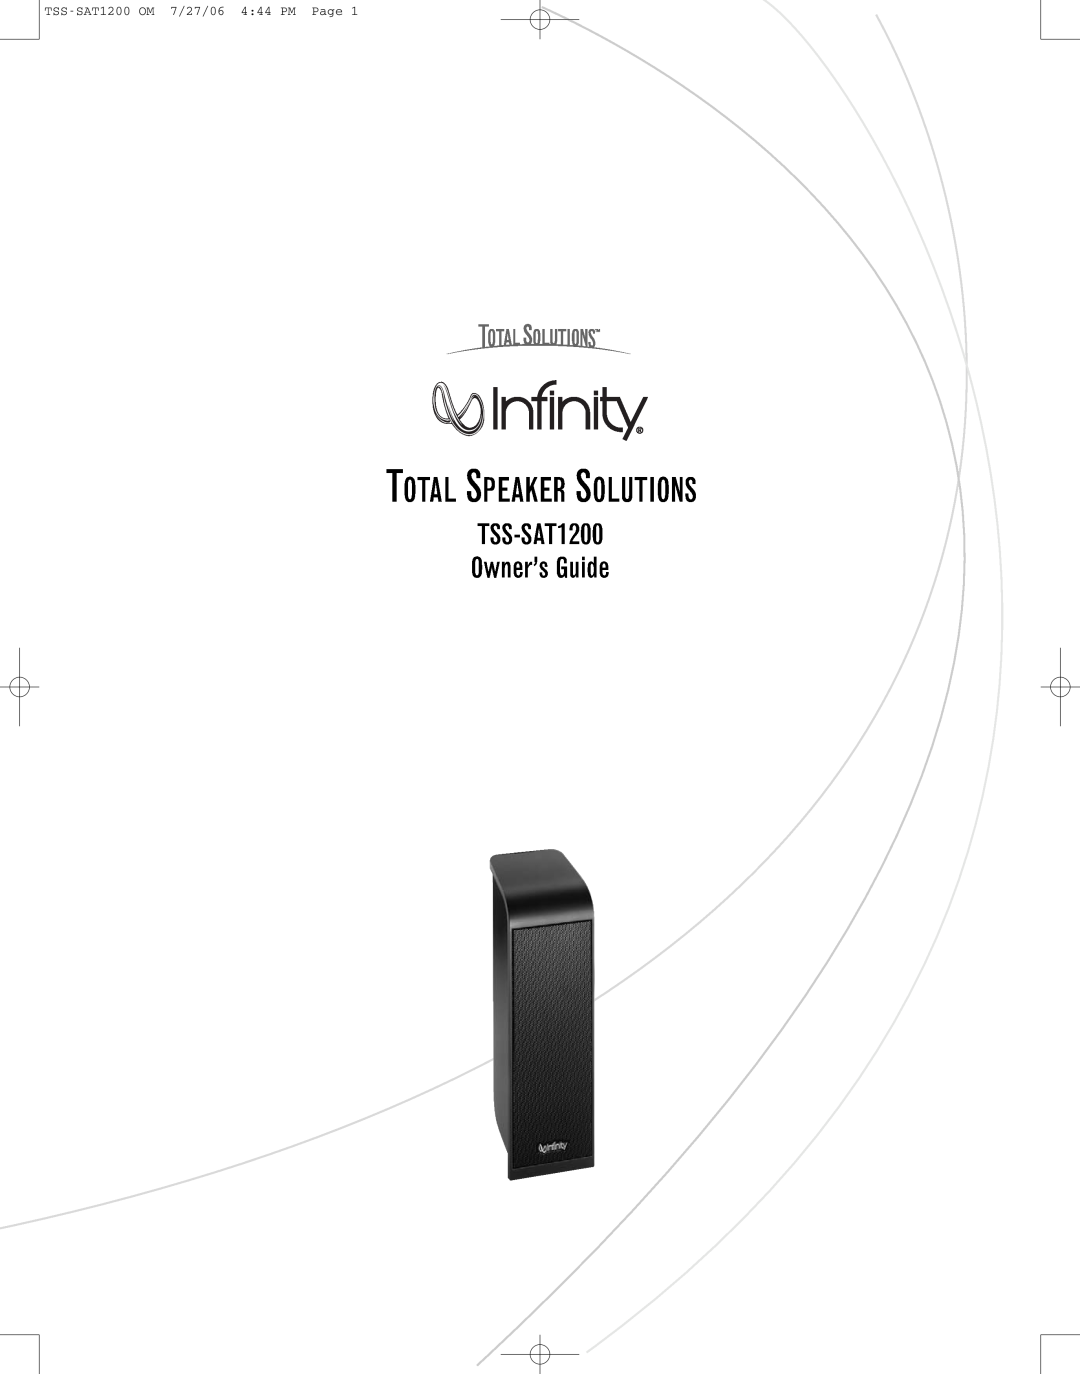 Infinity manual Total Speaker Solutions, TSS-SAT1200 Owner’s Guide, TSS-SAT1200OM 7/27/06 4 44 PM Page 